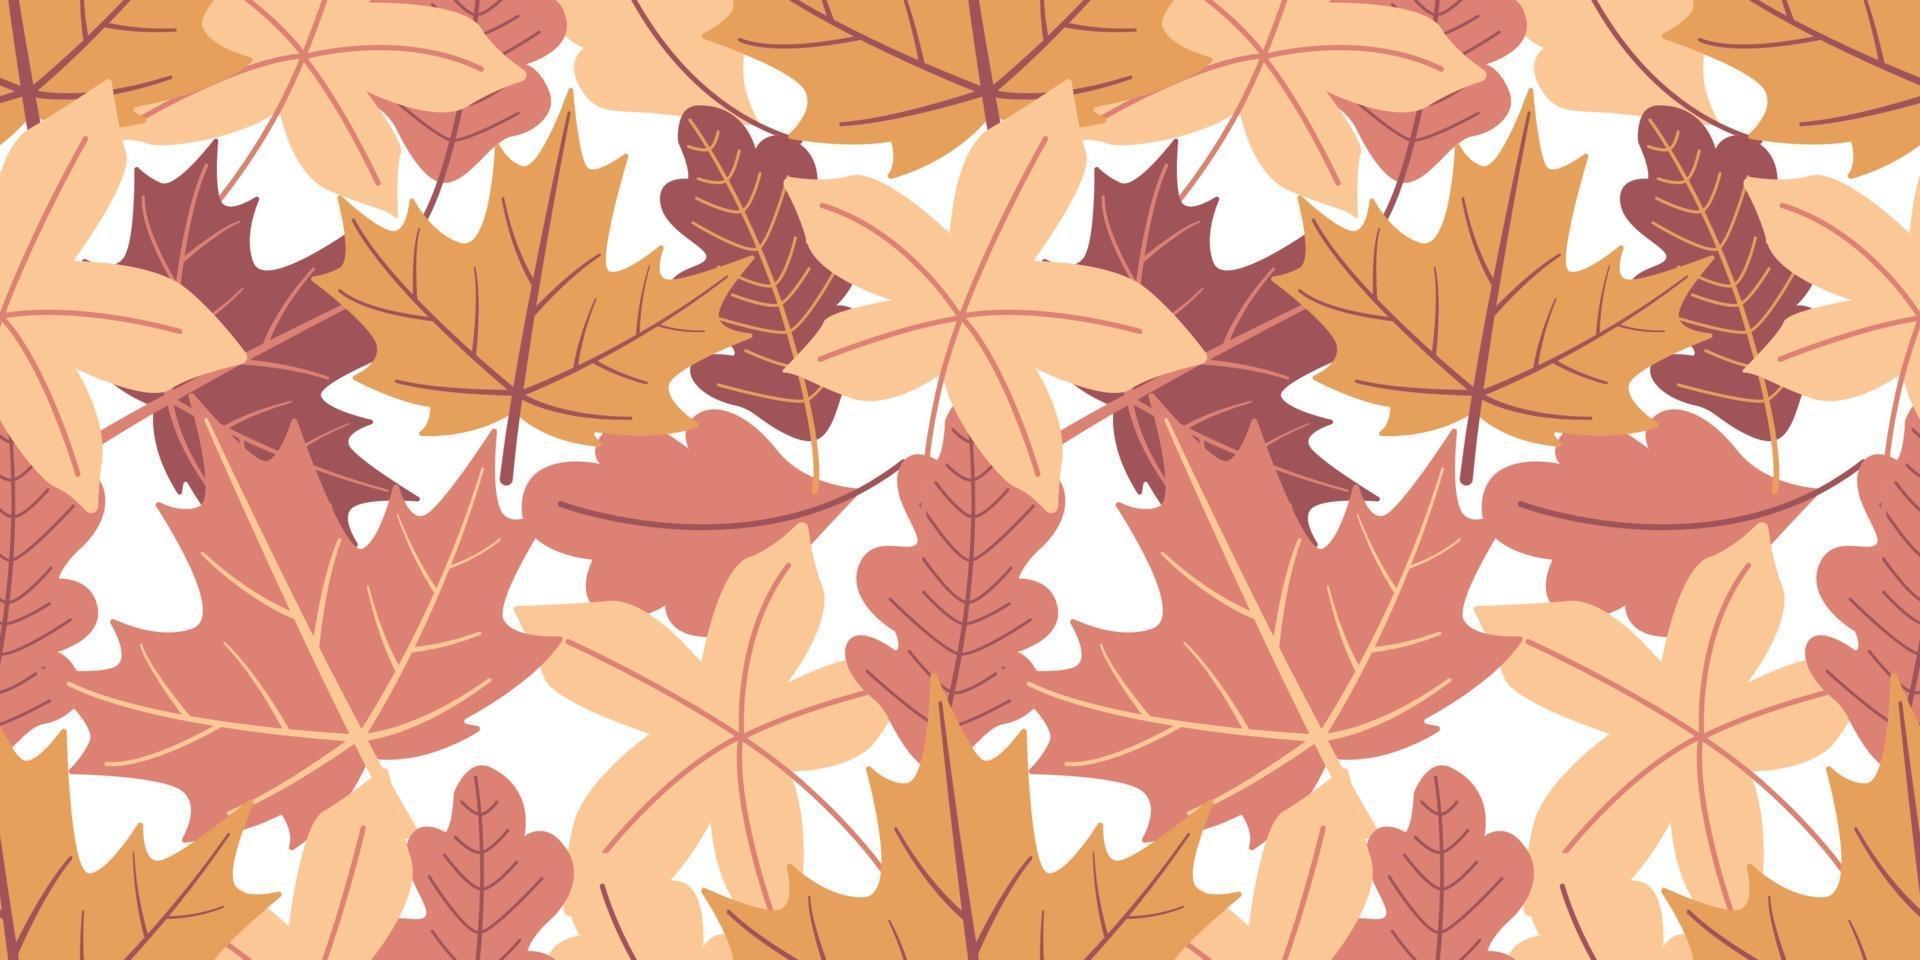 Autum leaves seamless pattern vector